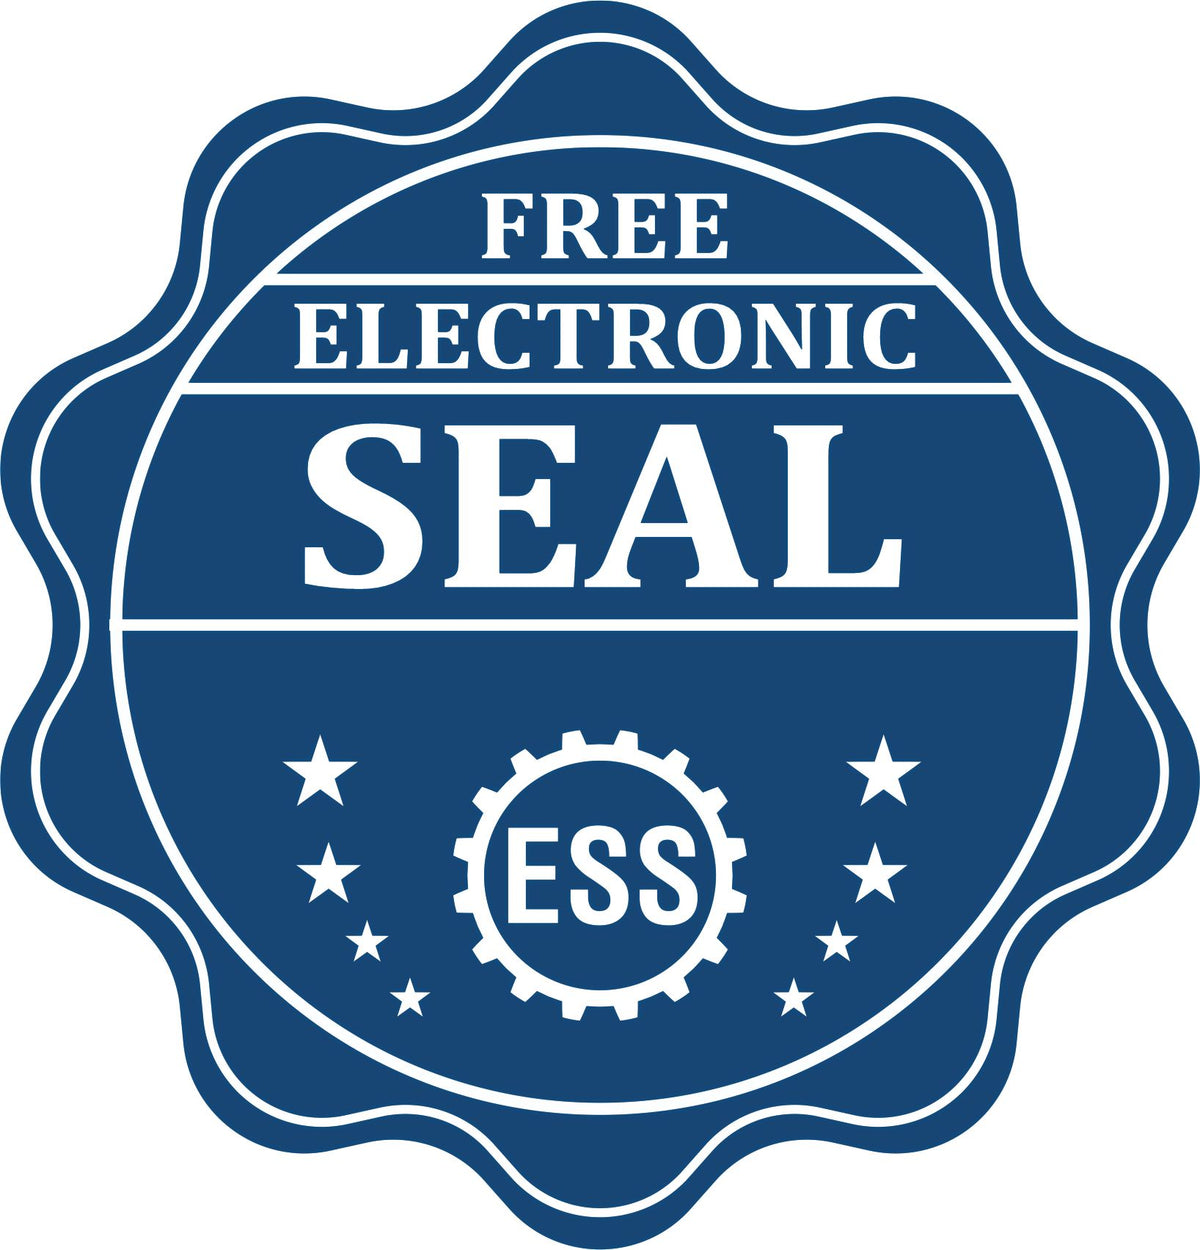 A badge showing a free electronic seal for the Slim Pre-Inked Nevada Professional Engineer Seal Stamp with stars and the ESS gear on the emblem.